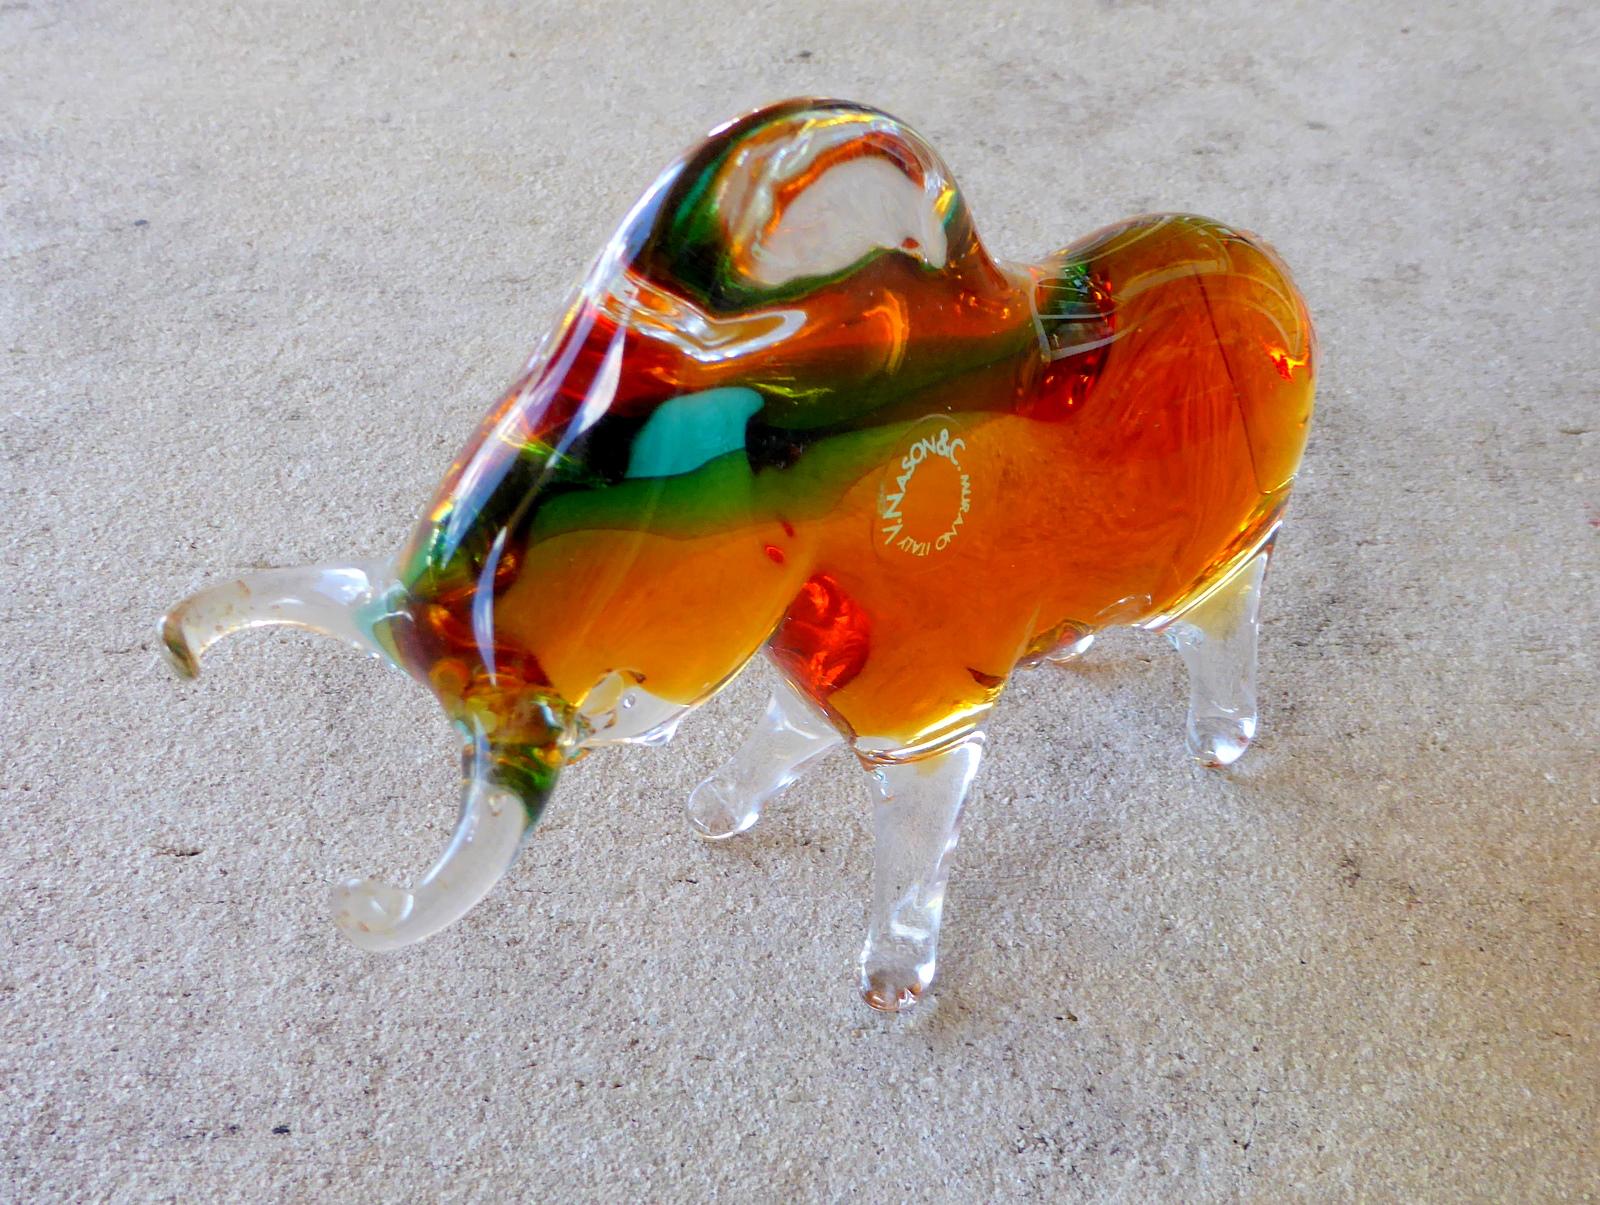 A lovely sommerso bull figurine in blue and amber encased in clear glass. Designed by Vincenzo Nason in the islands of Murano, Italy.

A few important notes about all items available through this 1stdibs dealer:

1. We list all our items as being in